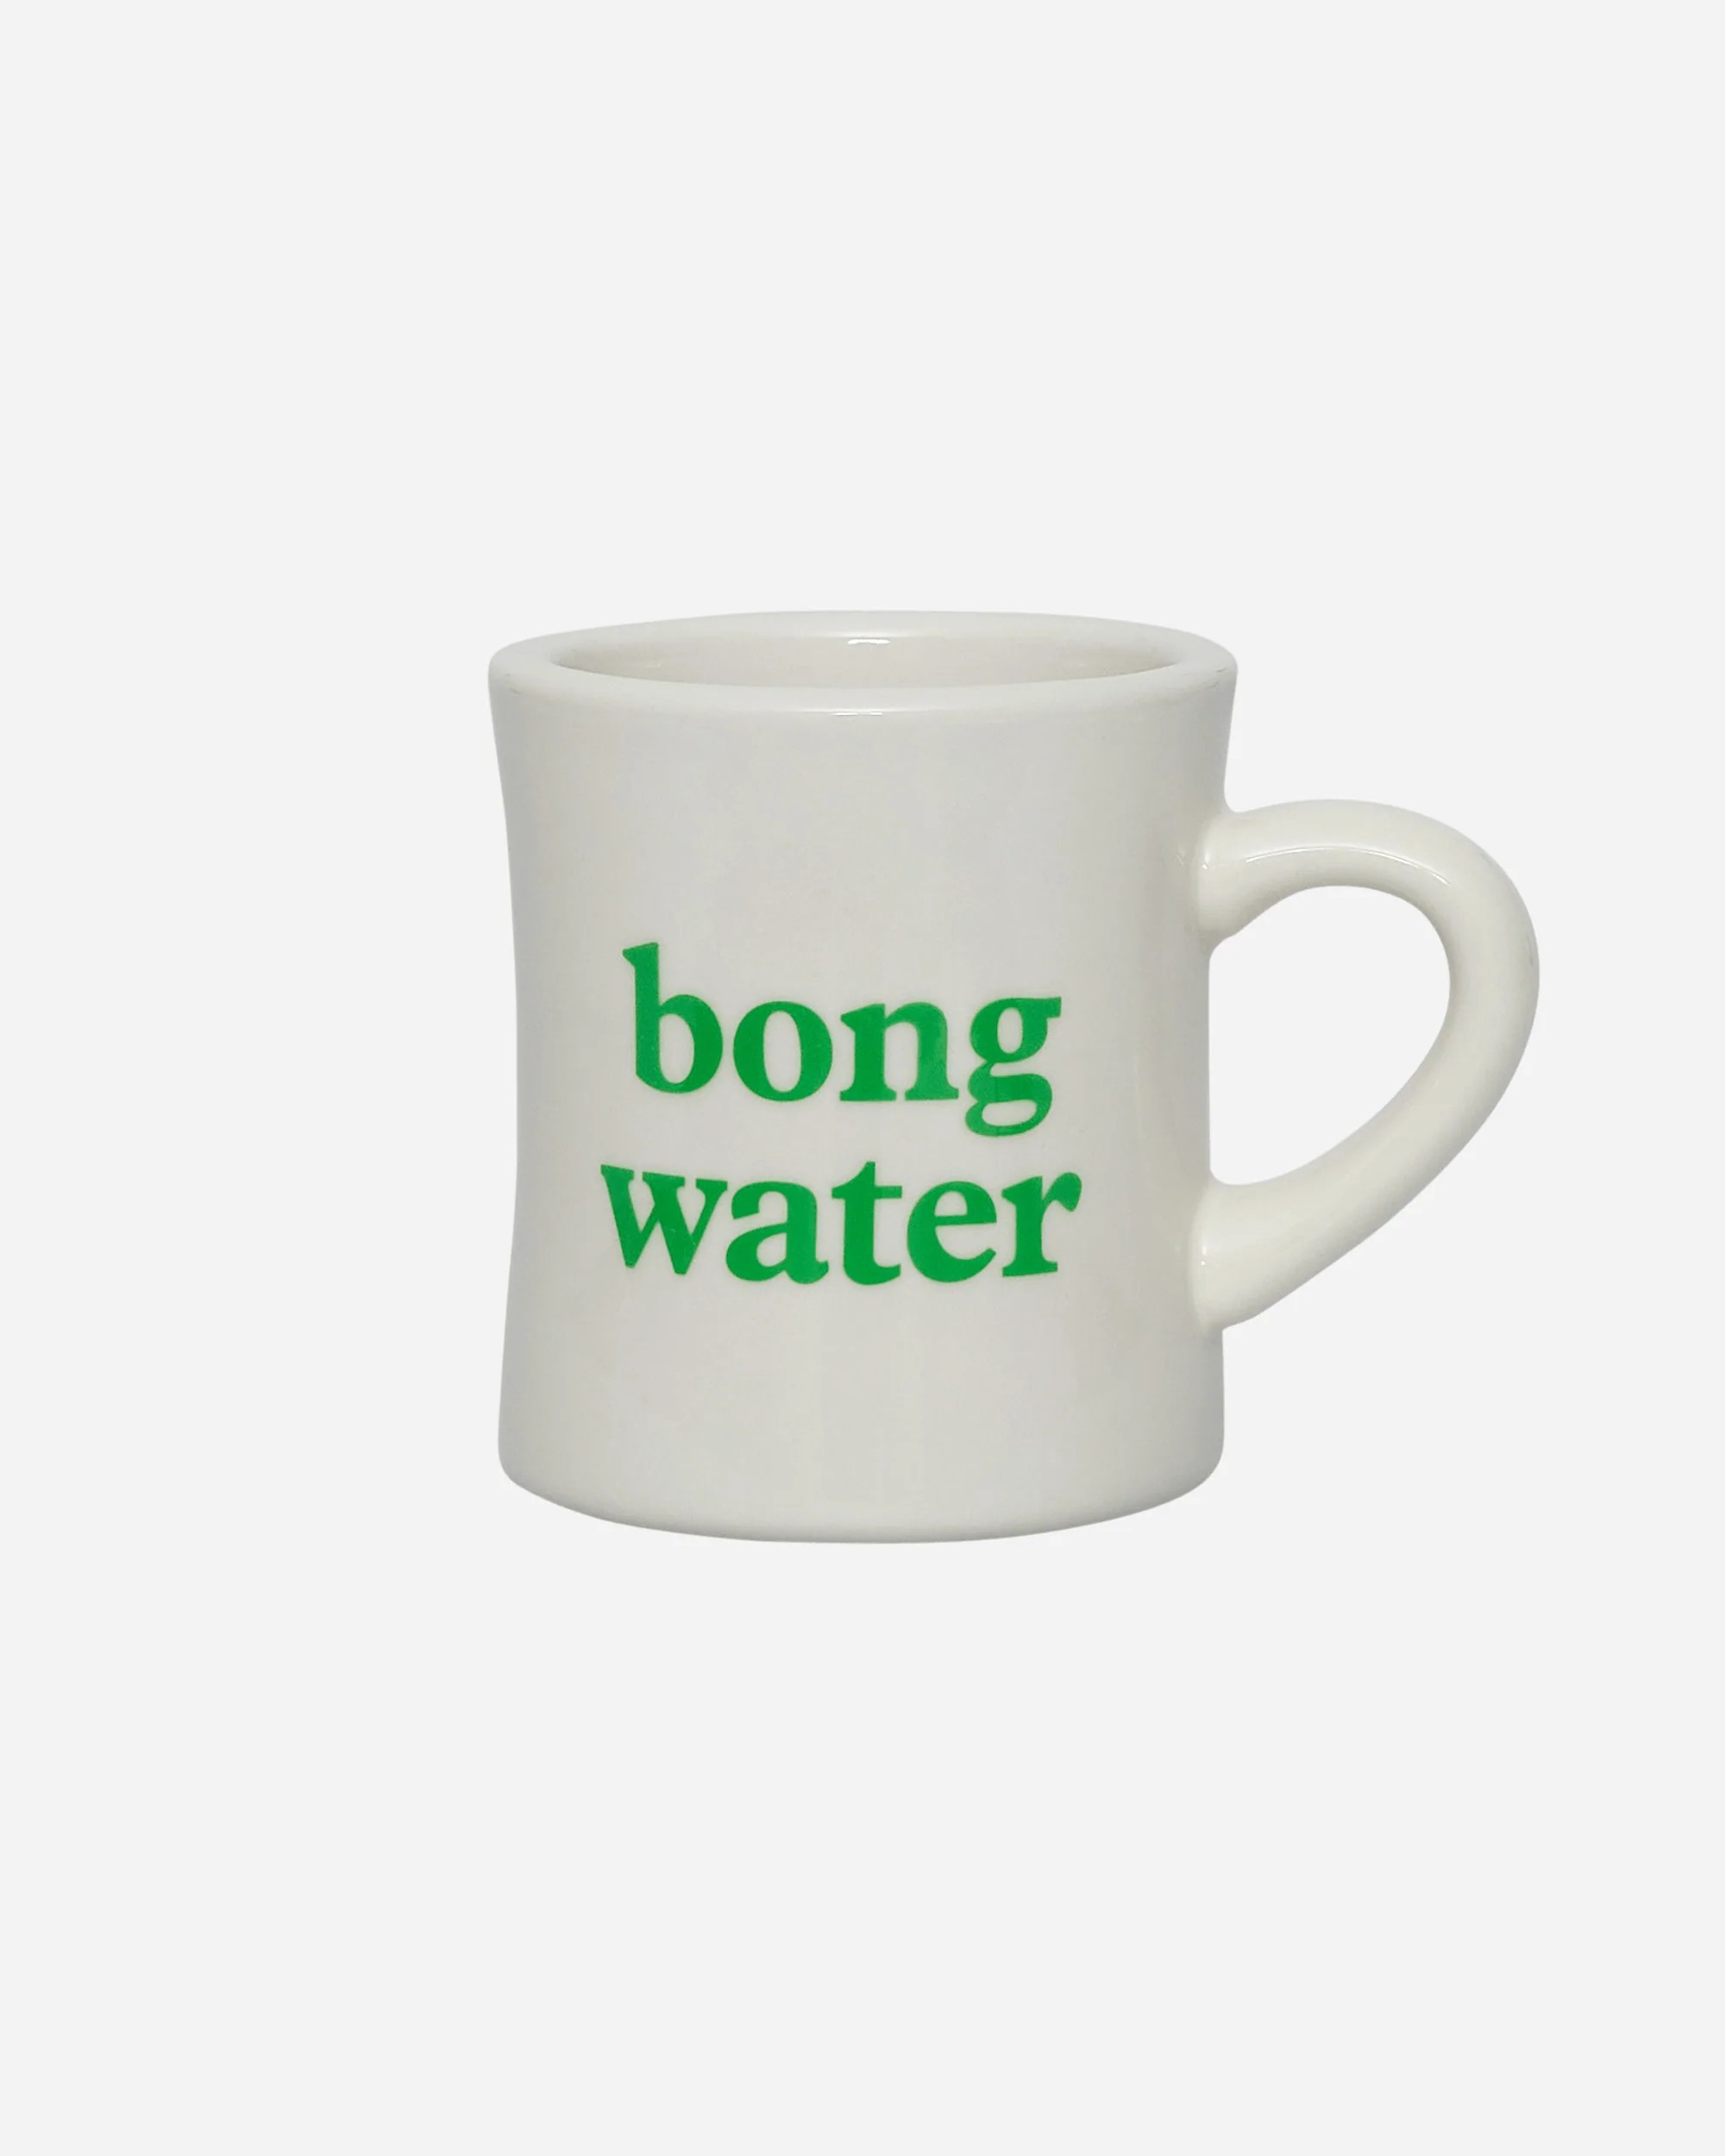 https://video-images.vice.com//products/6398c4afe1f962e27e132d5f/gallery-image/1670956207625-mistergreen-lifestyle-mugs-bongwatermuggreen-mgbongmug003-20220121183639012500x.png?crop=1xw:0.45xh;0xw,0.275xh